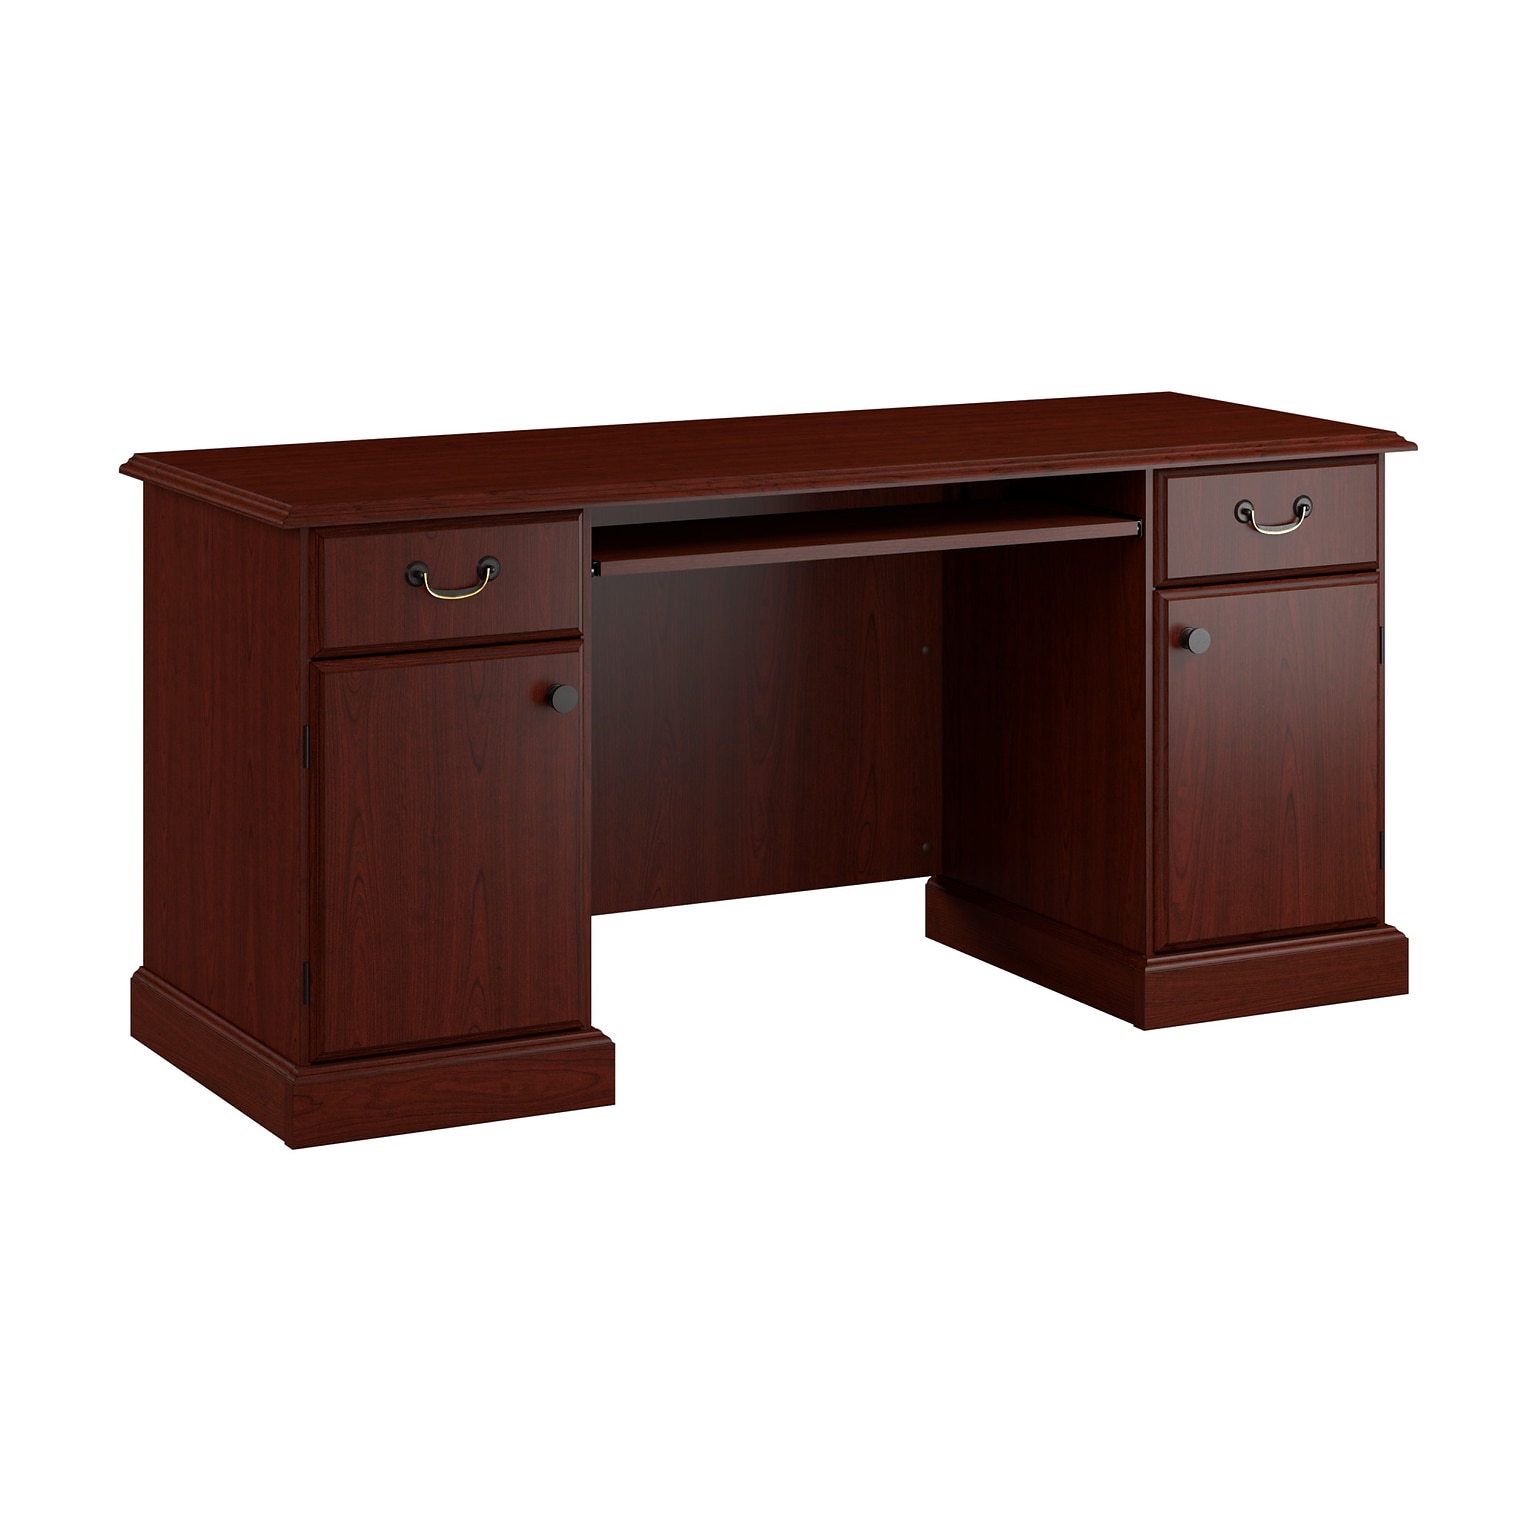 Bush Business Furniture 66W Arlington Computer Desk with Storage and Keyboard Tray, Harvest Cherry (WC65510-03K)